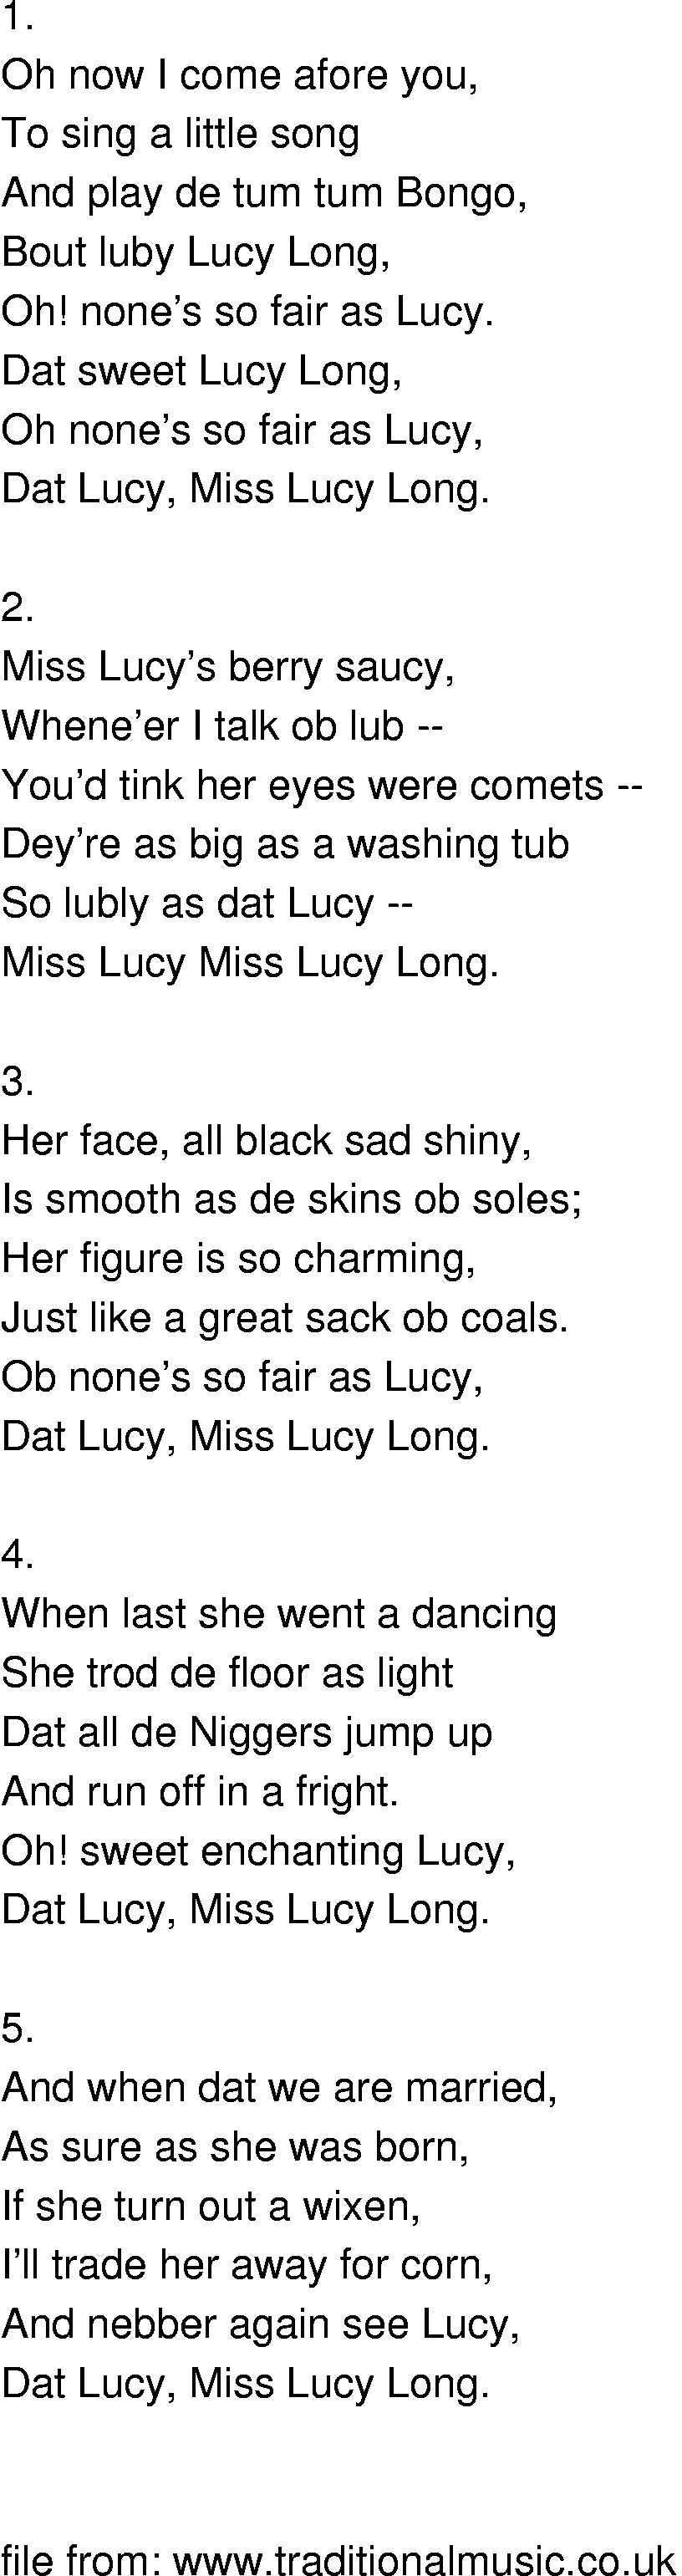 Old-Time (oldtimey) Song Lyrics - lucy long